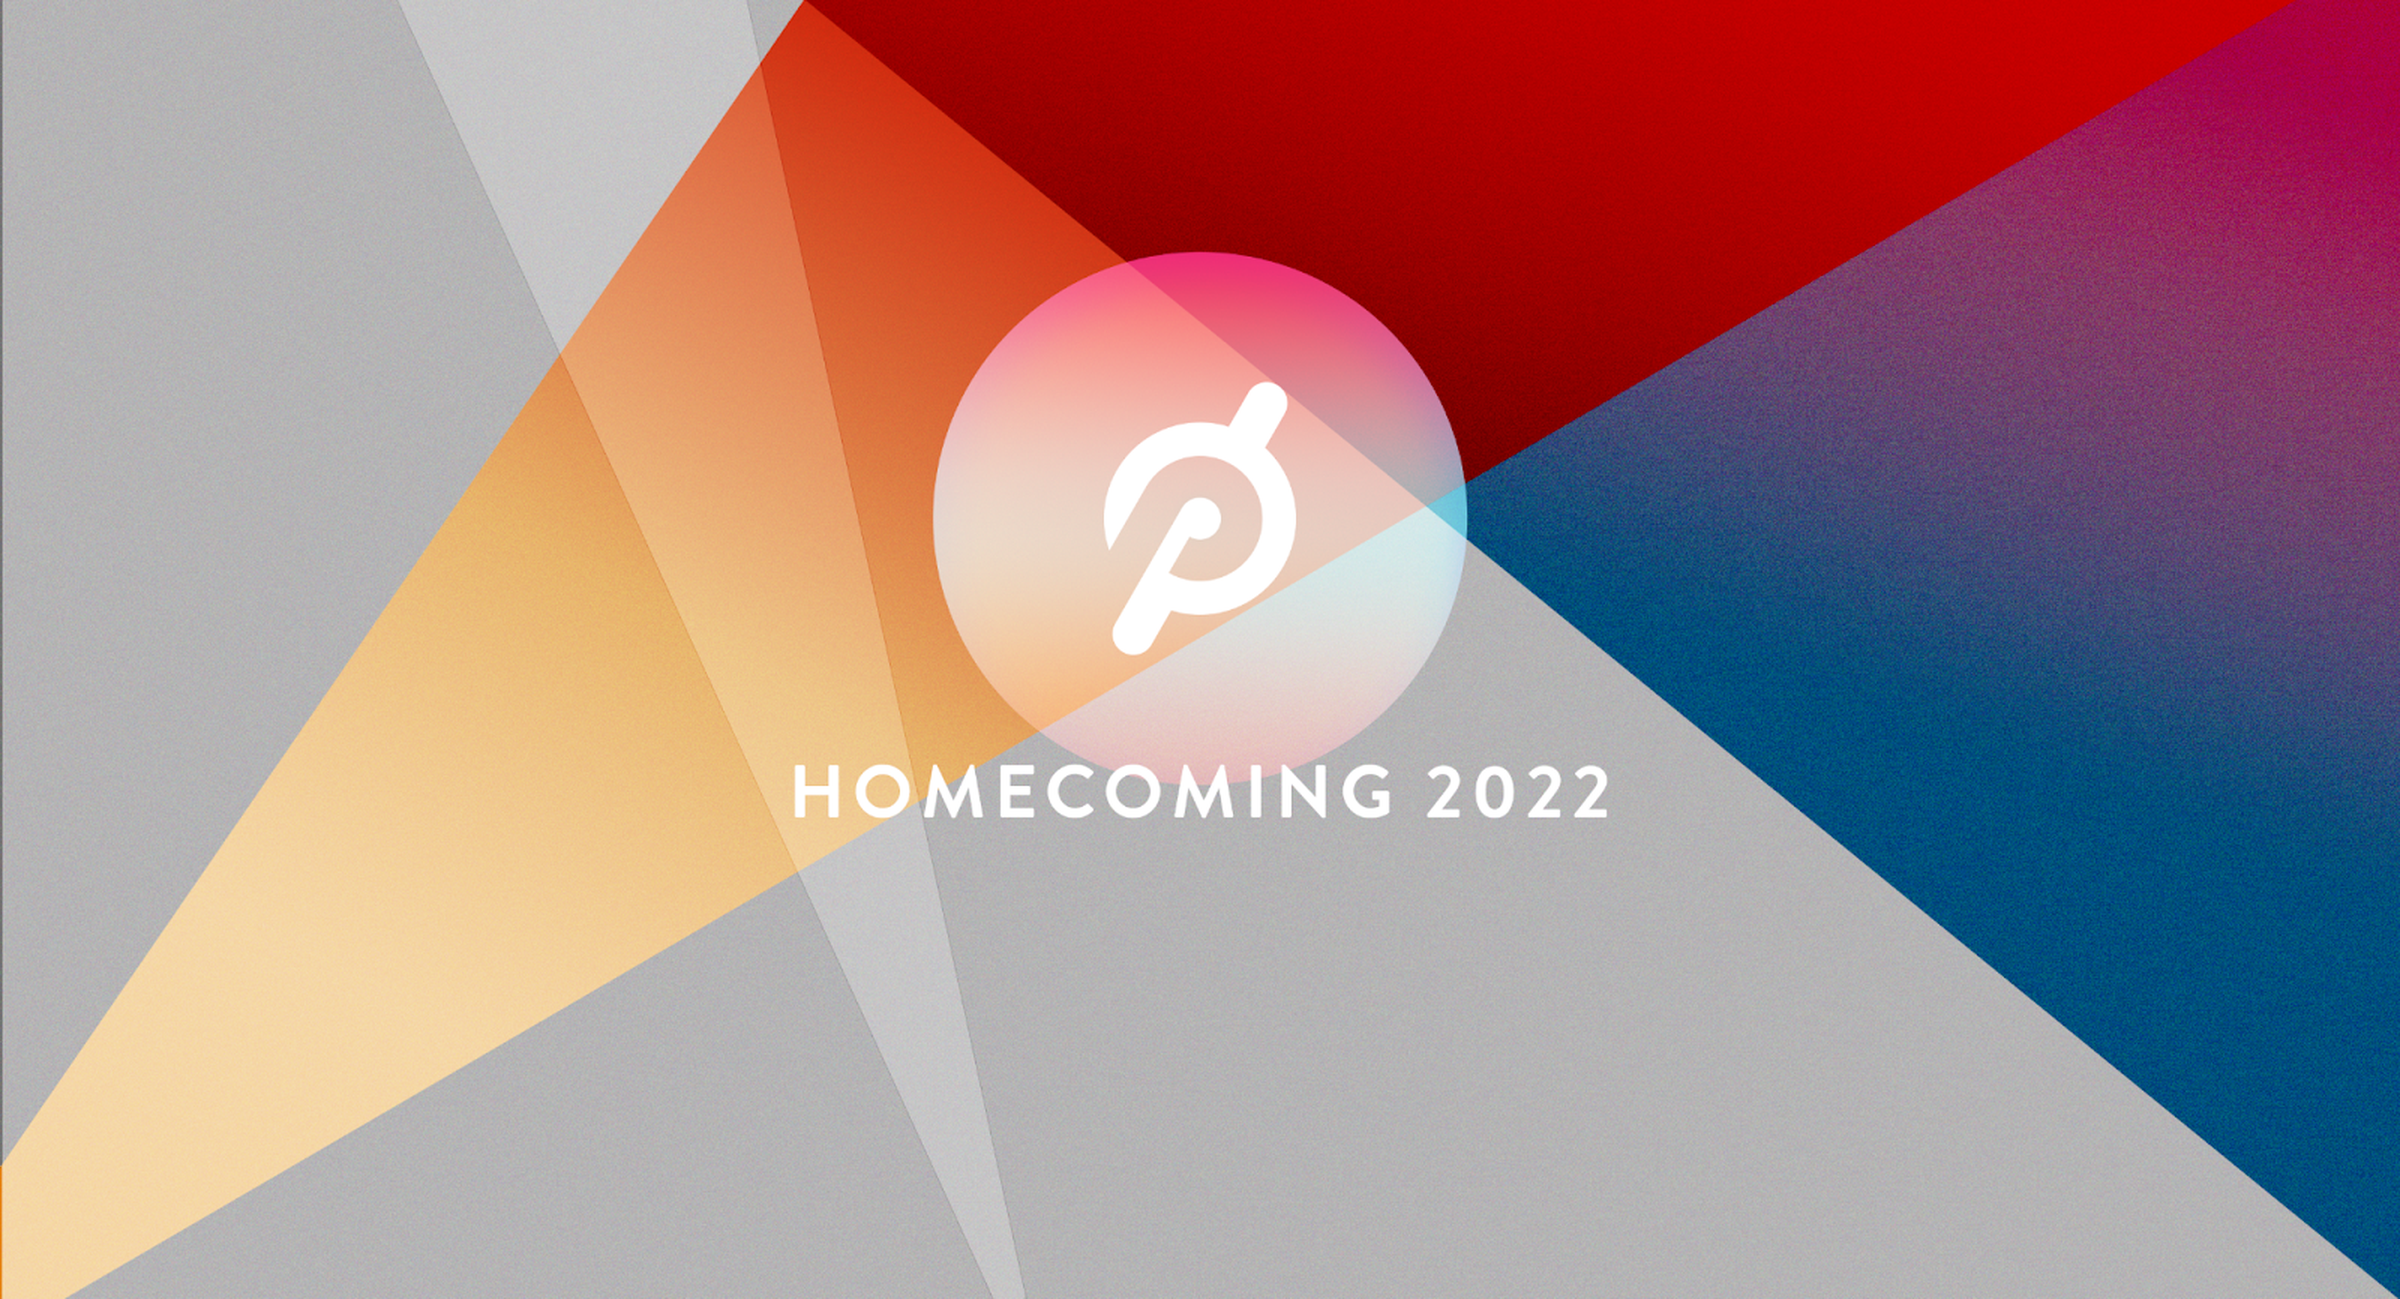 Homecoming is an annual event for fans where Peloton announces new features and teases new products.